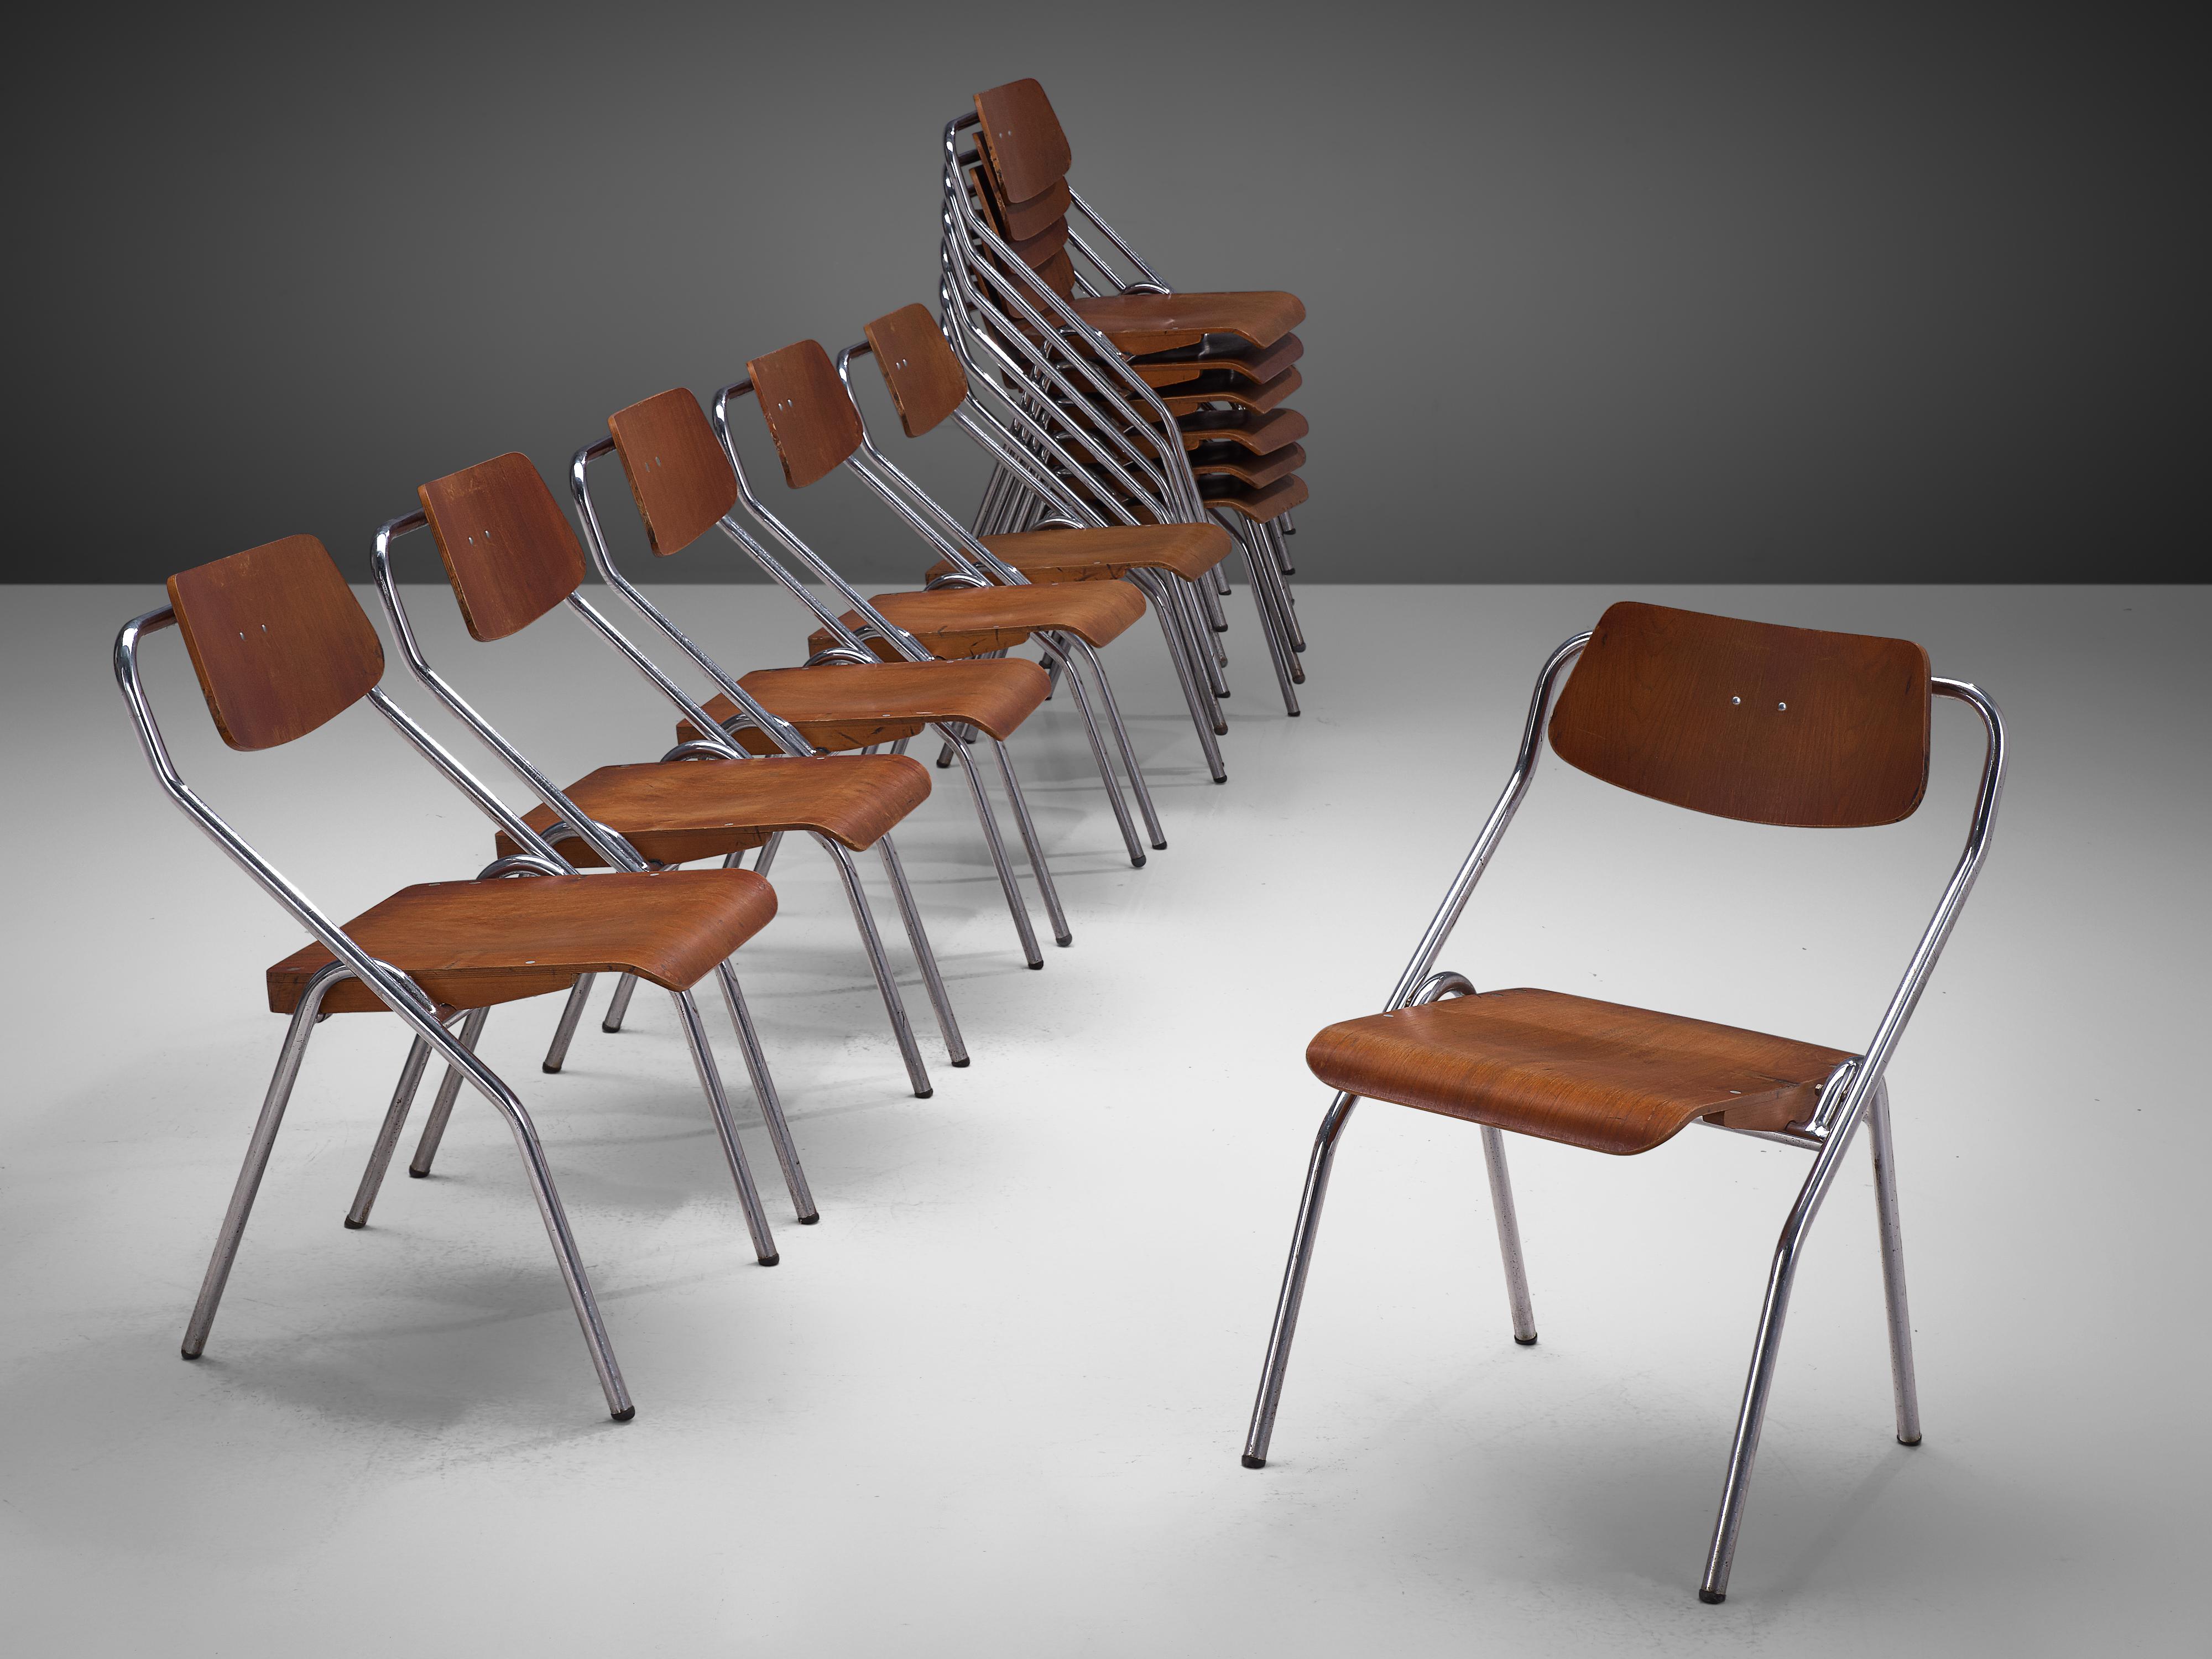 Set of six foldable chairs, chrome-plated metal and plywood, The Netherlands, circa. 1930

This set of midcentury Dutch School chairs would be a great choice for your project if you are looking for chairs that are easy to store. The seats are